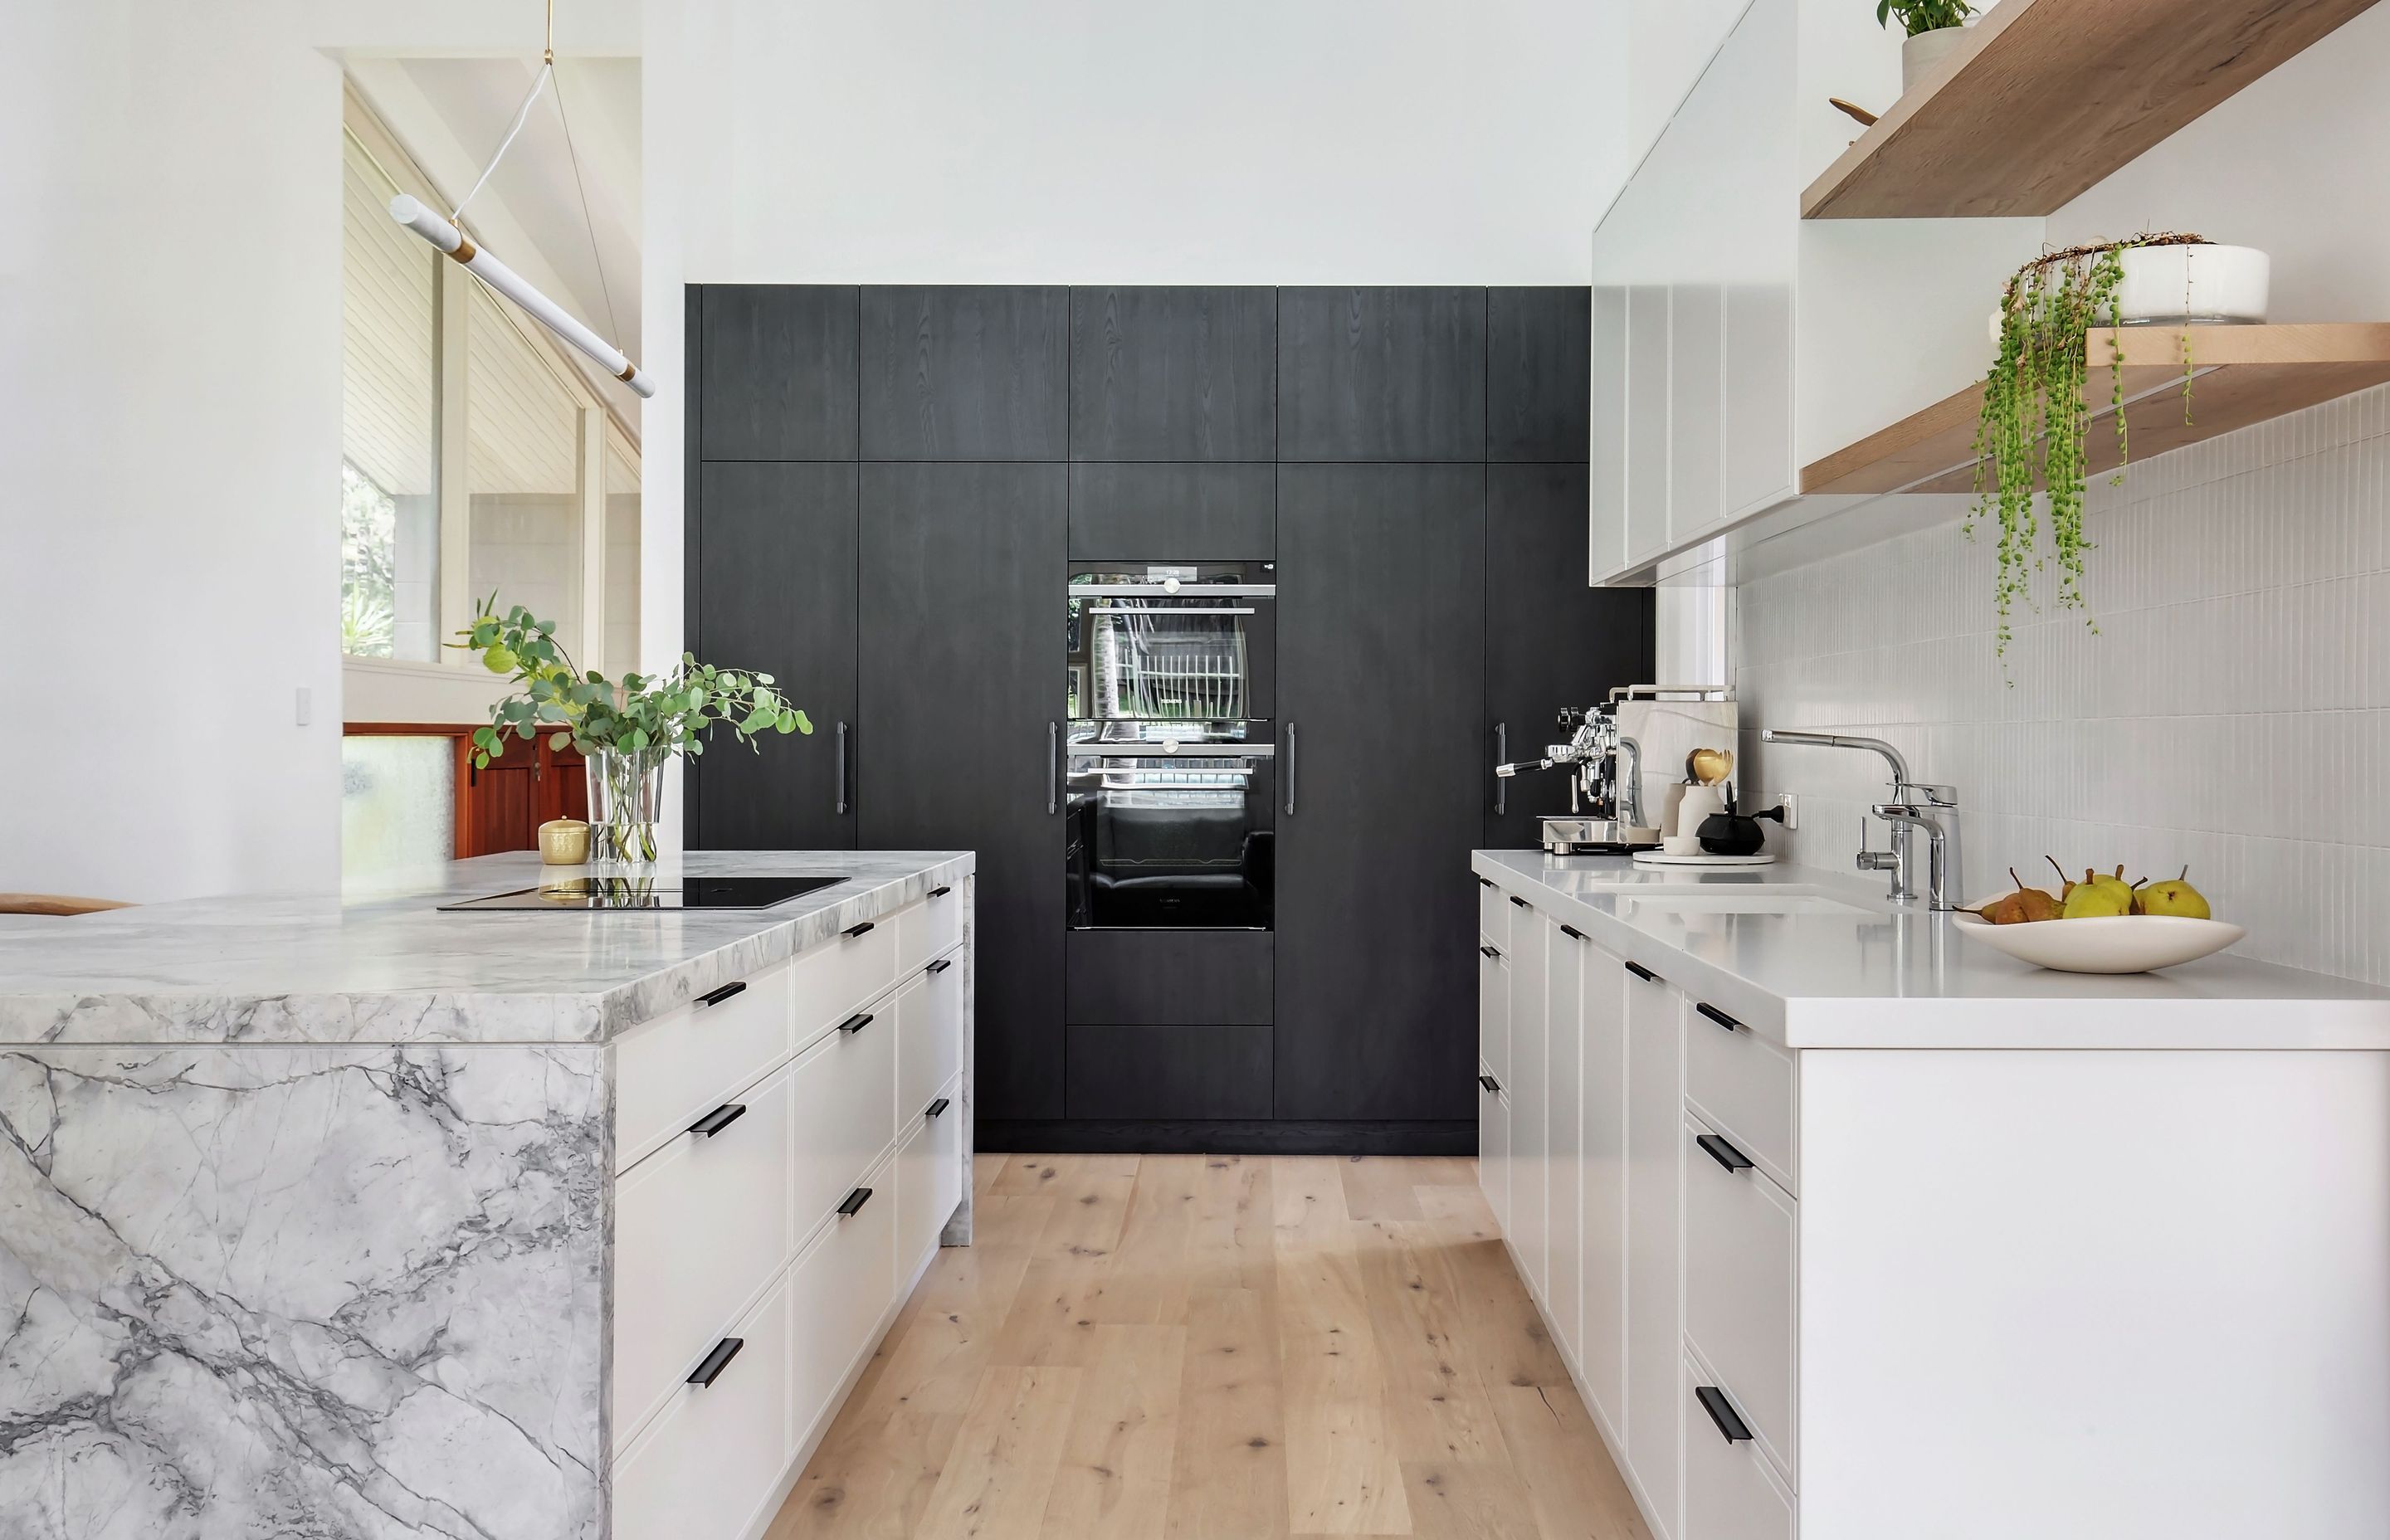 Cherrybrooke Kitchen by Dan kitchens | Photography by Paul Worsely